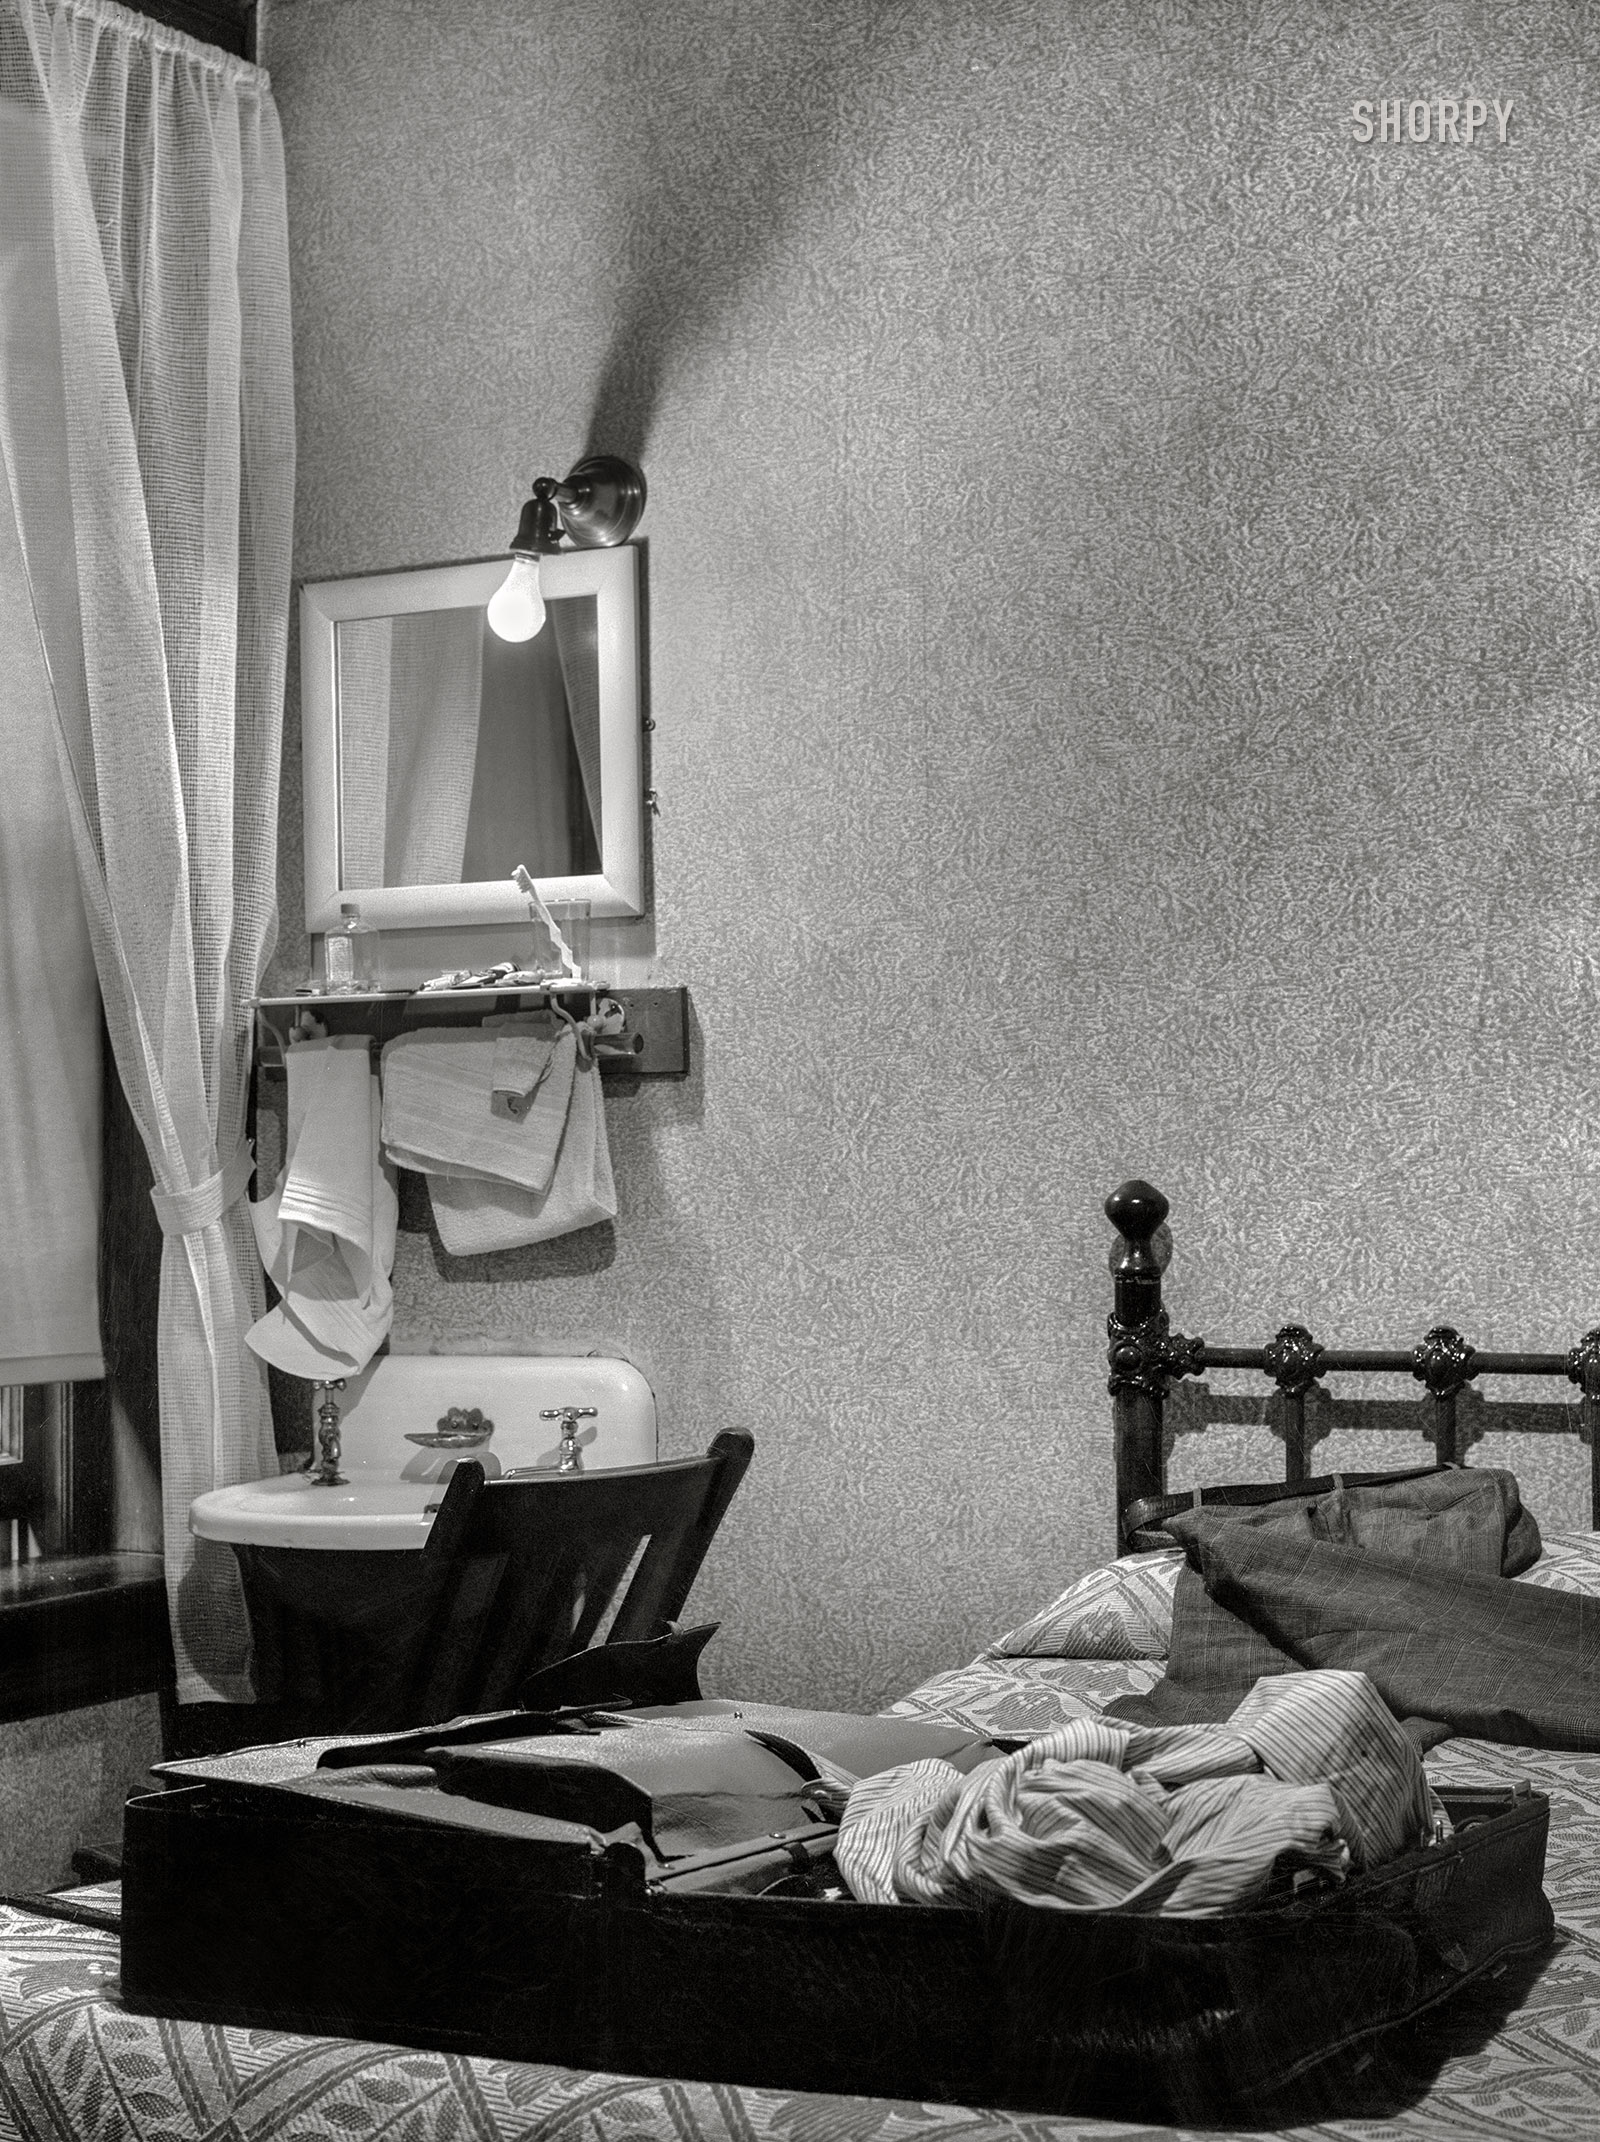 June 1939. "Hotel bedroom. Elkins, West Virginia." The Bare Bulb Arms hopes you enjoy your stay in the Edward Hopper Suite. Acetate negative by John Vachon. View full size.